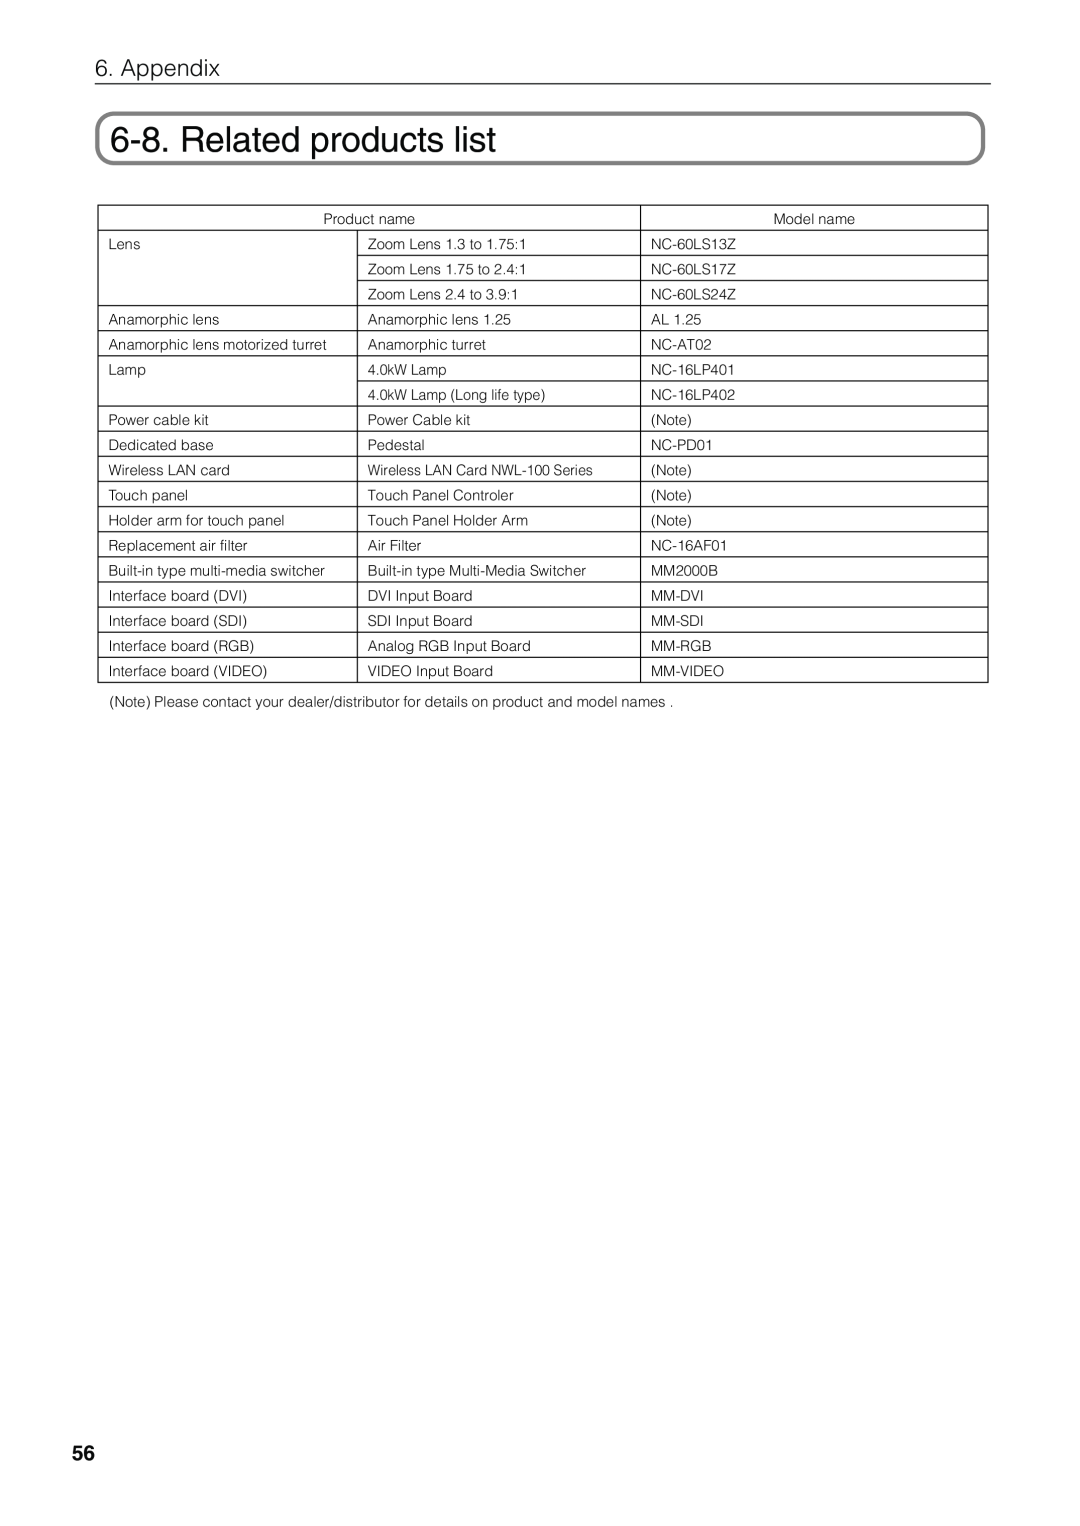 NEC NC1600C user manual Related products list, Appendix 